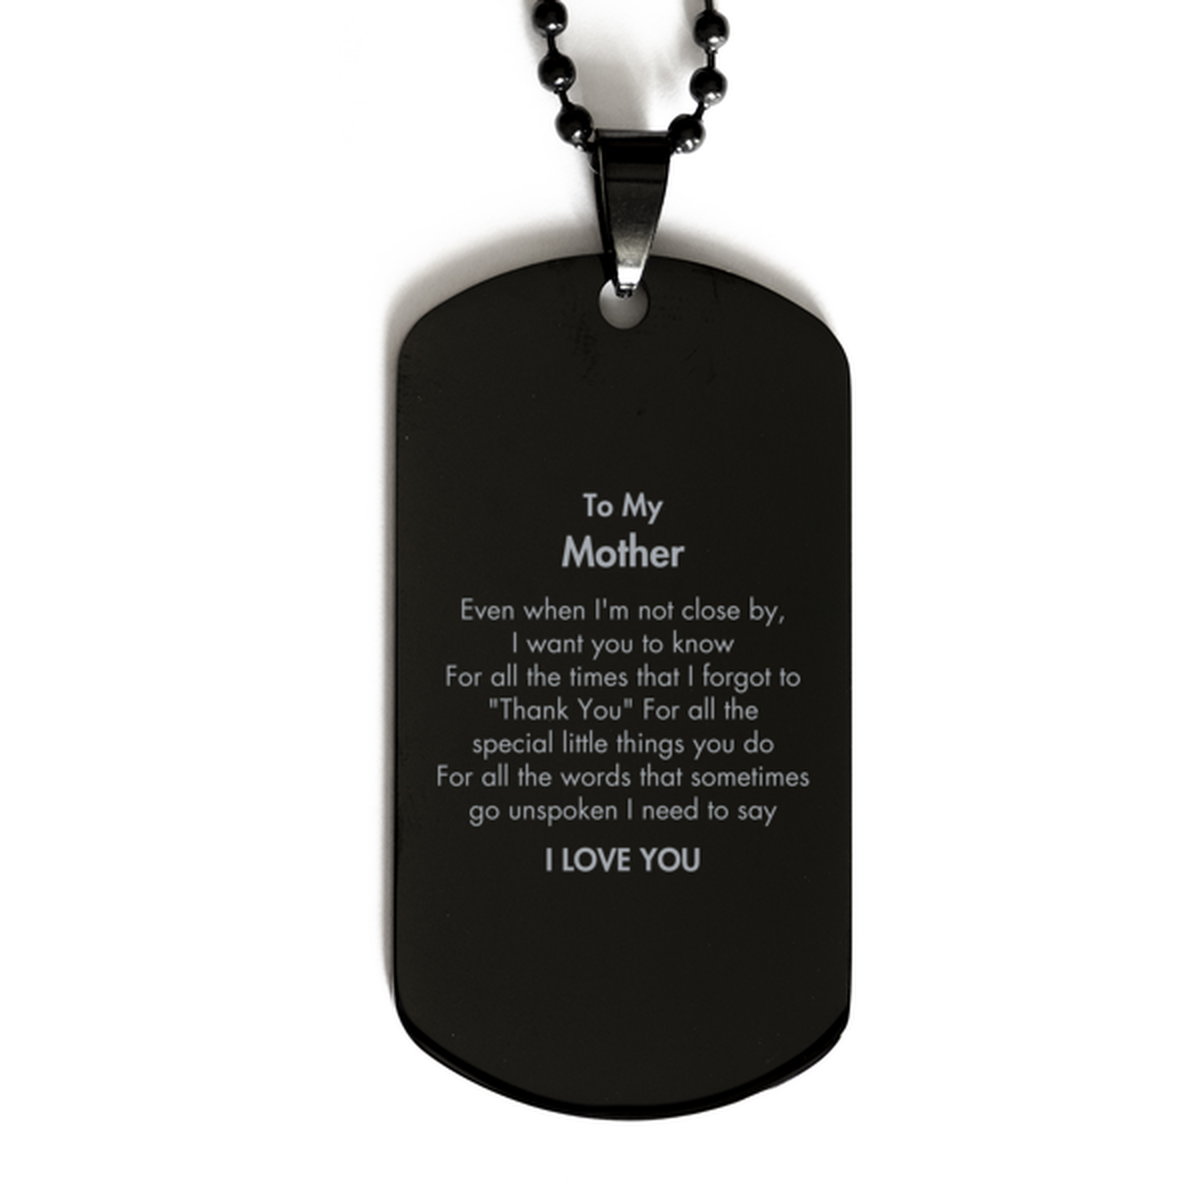 Thank You Gifts for Mother, Keepsake Black Dog Tag Gifts for Mother Birthday Mother's day Father's Day Mother For all the words That sometimes go unspoken I need to say I LOVE YOU